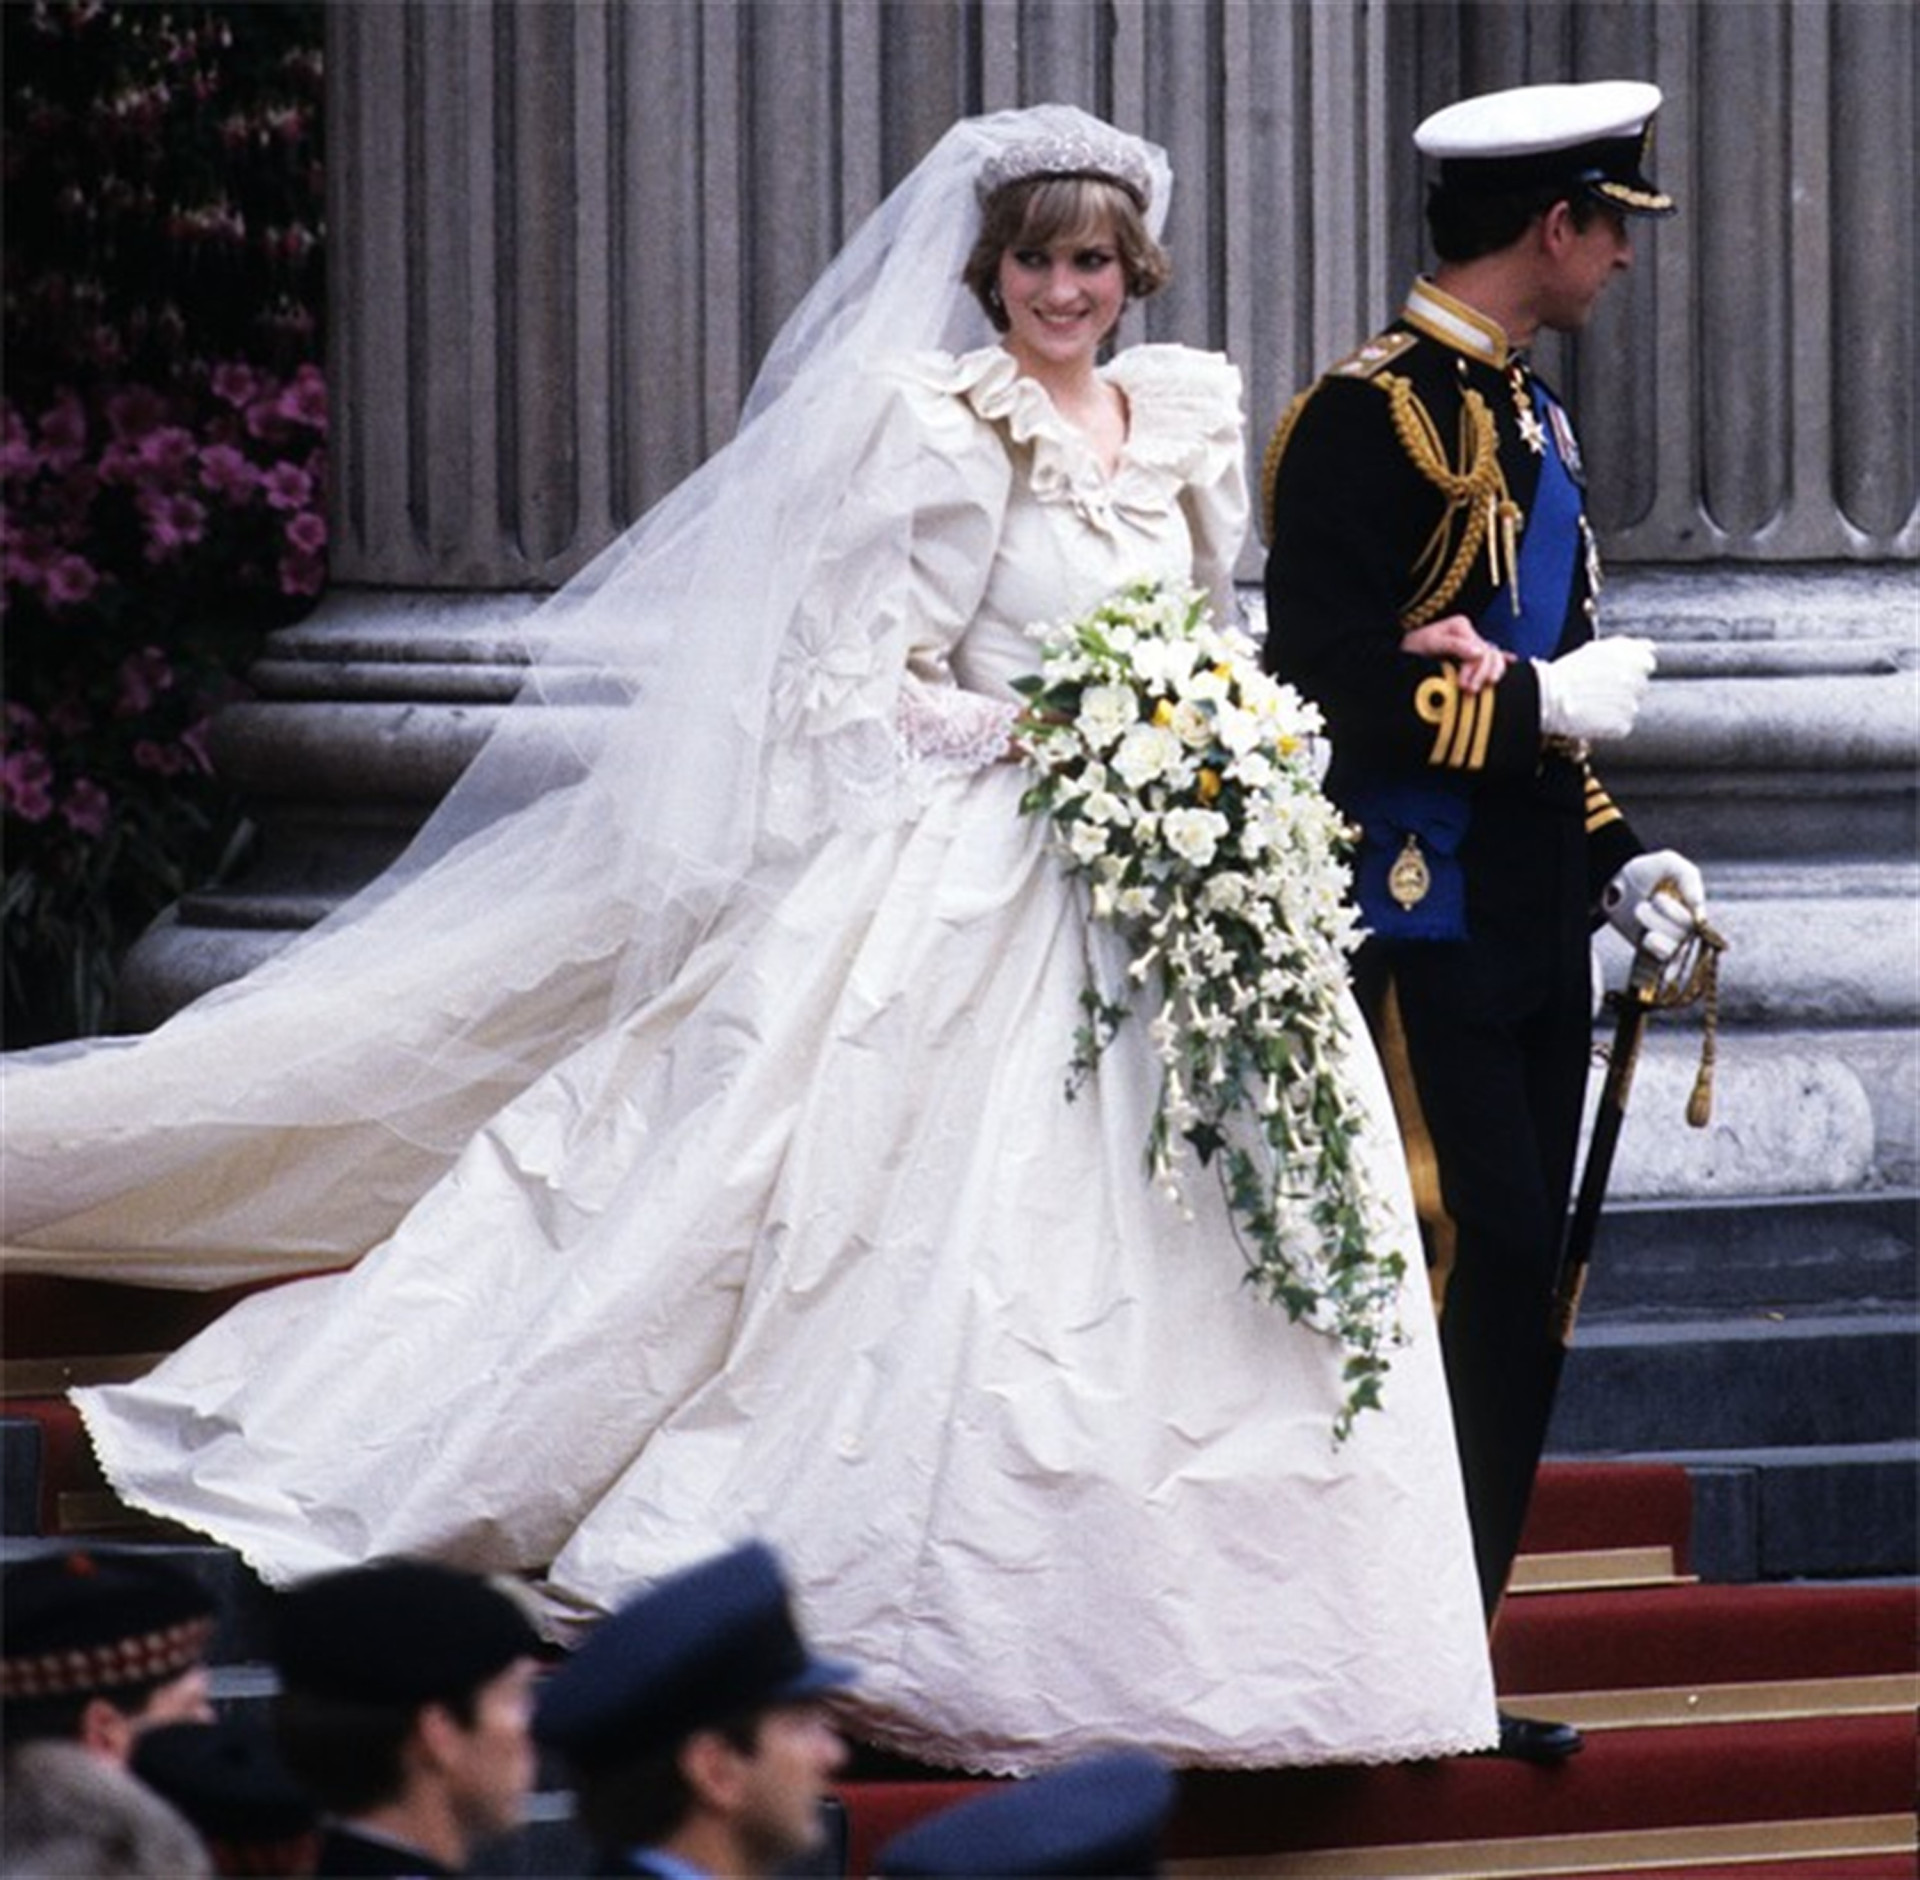 The men of Princess Diana's life: public and private